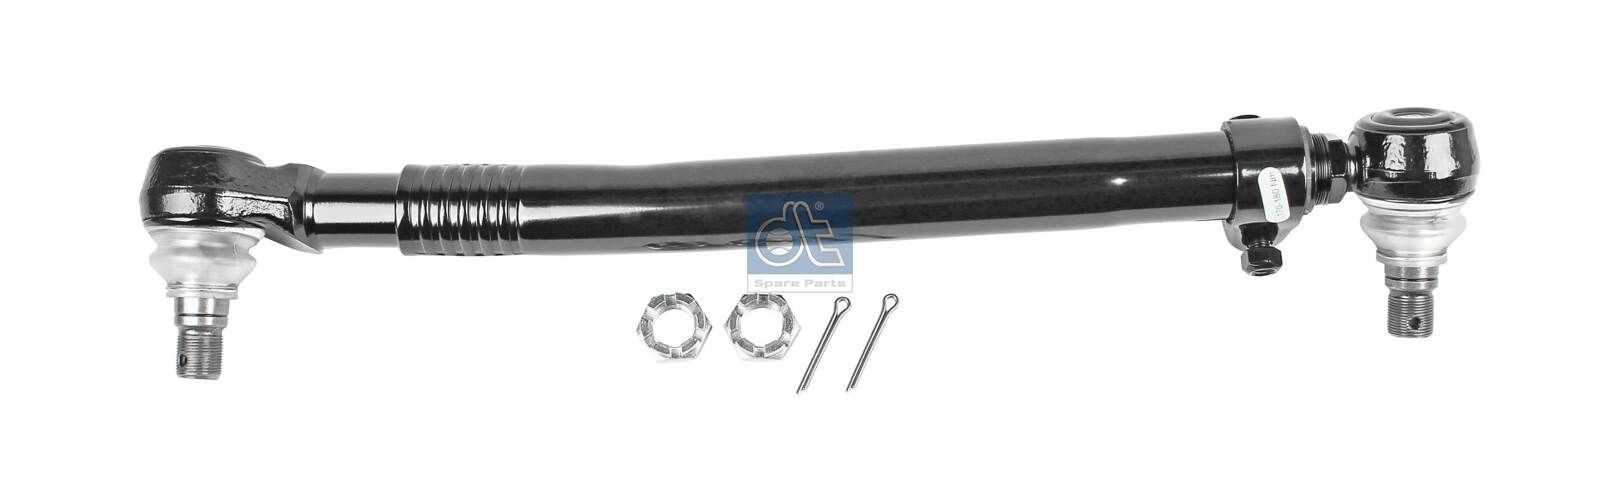 DT Spare Parts 1.19385 Rod Assembly 2 412 634